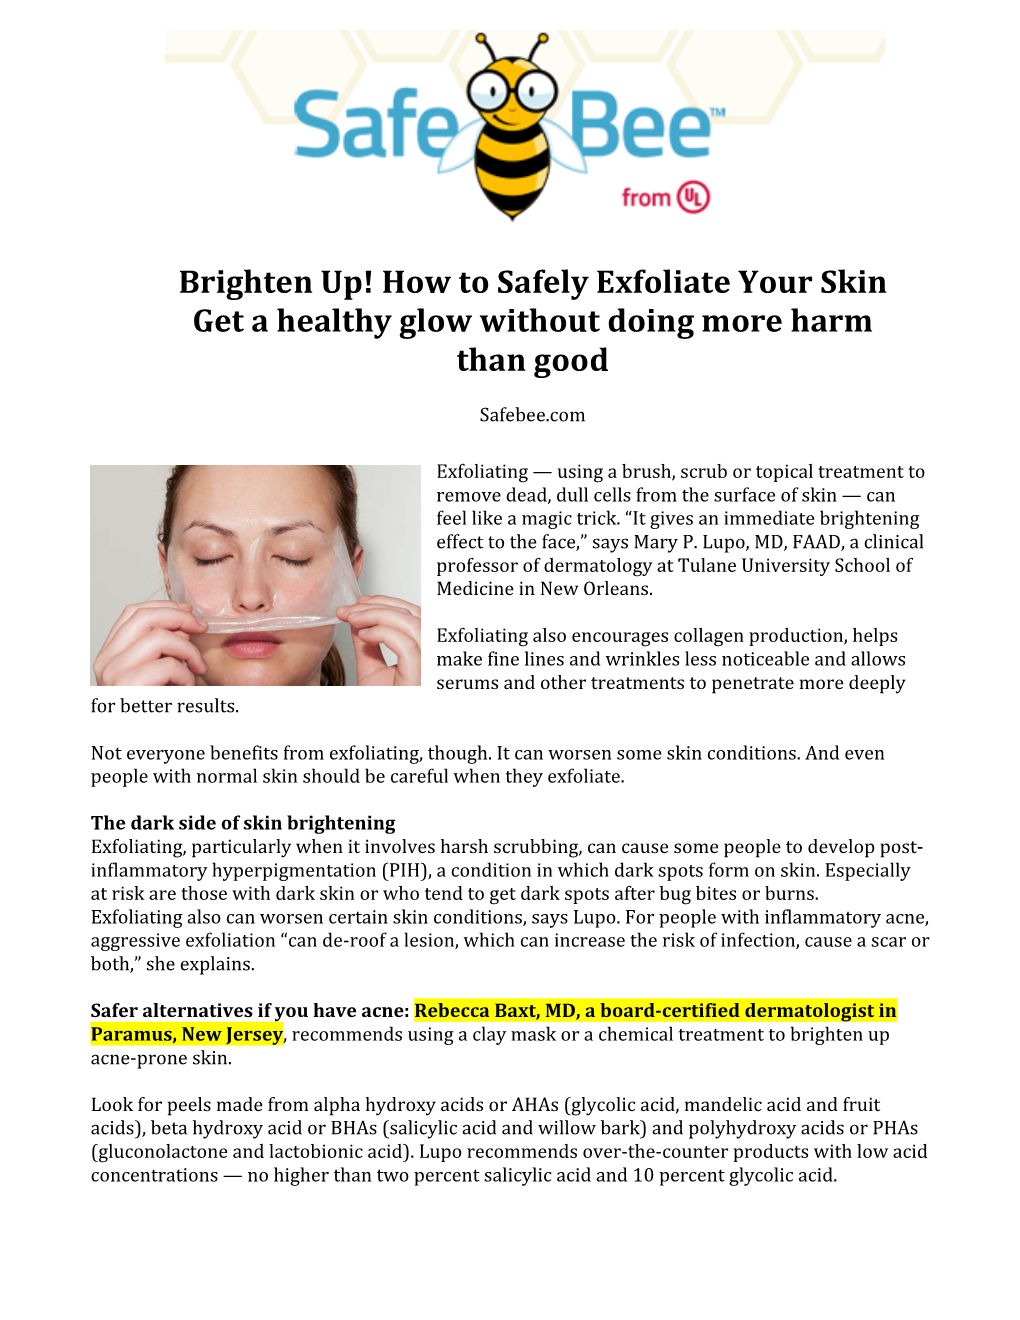 How to Safely Exfoliate Your Skin Get a Healthy Glow Without Doing More Harm Than Good